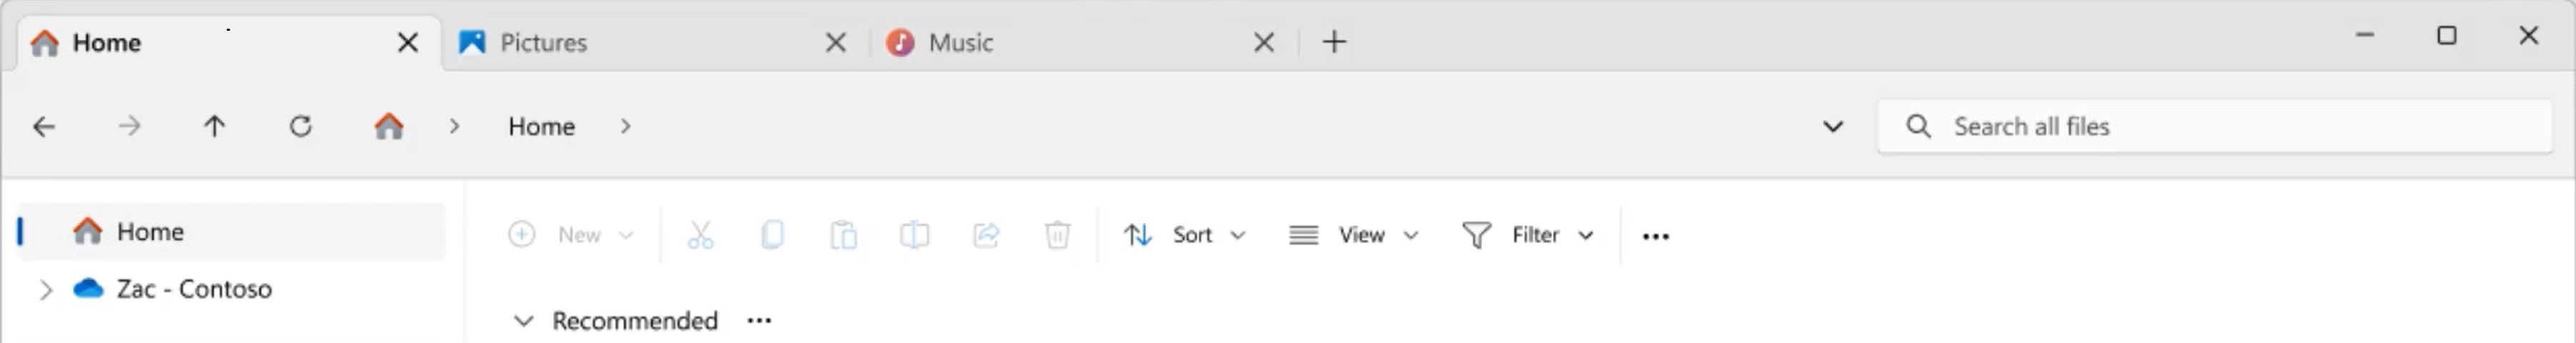 Screenshot of the navigation bar in the Windows 11 File Explorer with file controls below the address bar